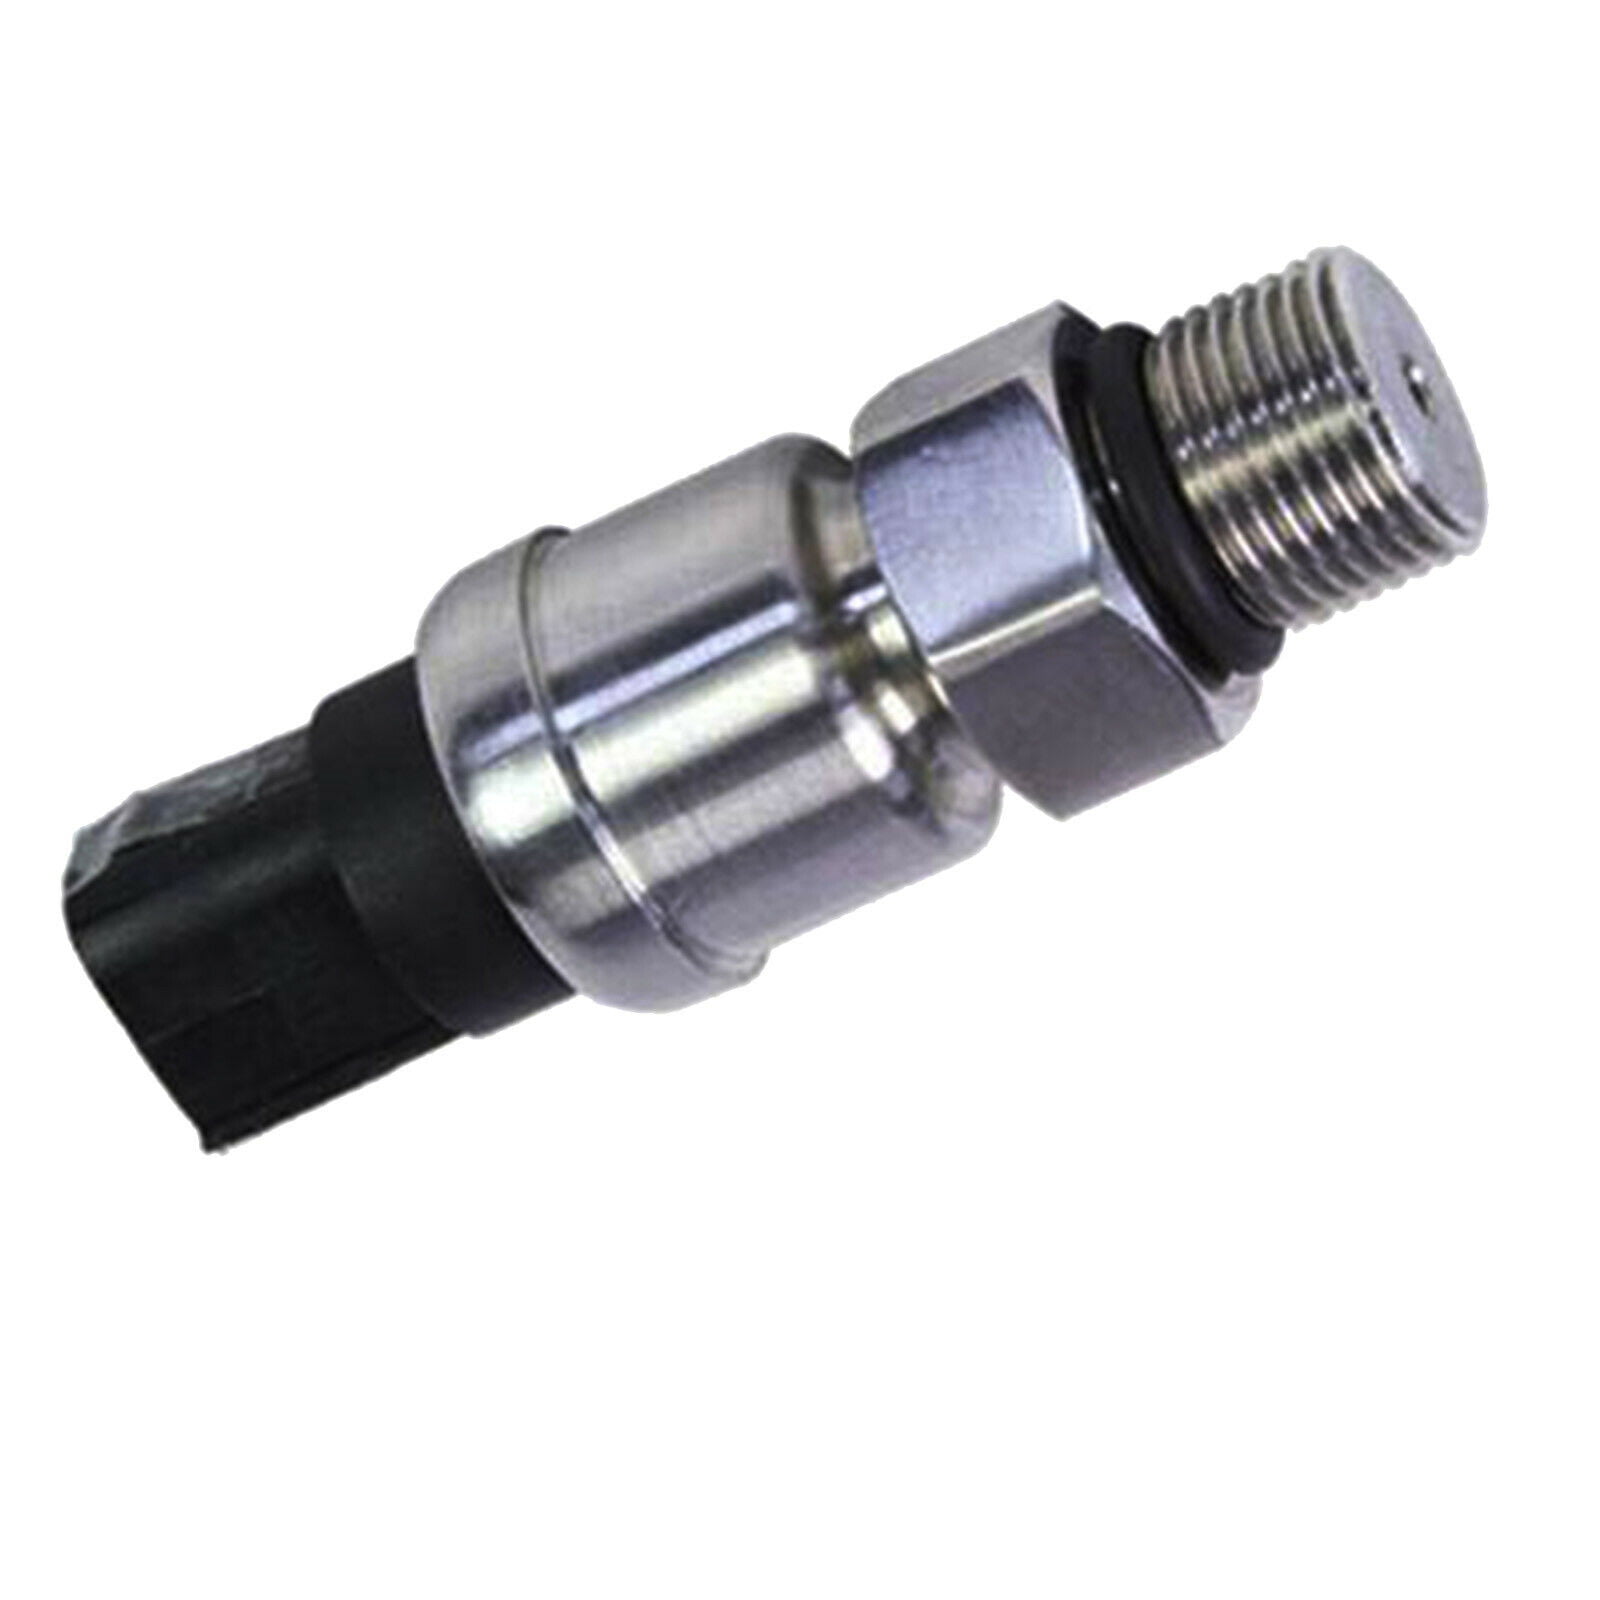 Details about   1 PCS New 1020500686 Pressure Sensor Switch For Excavator 